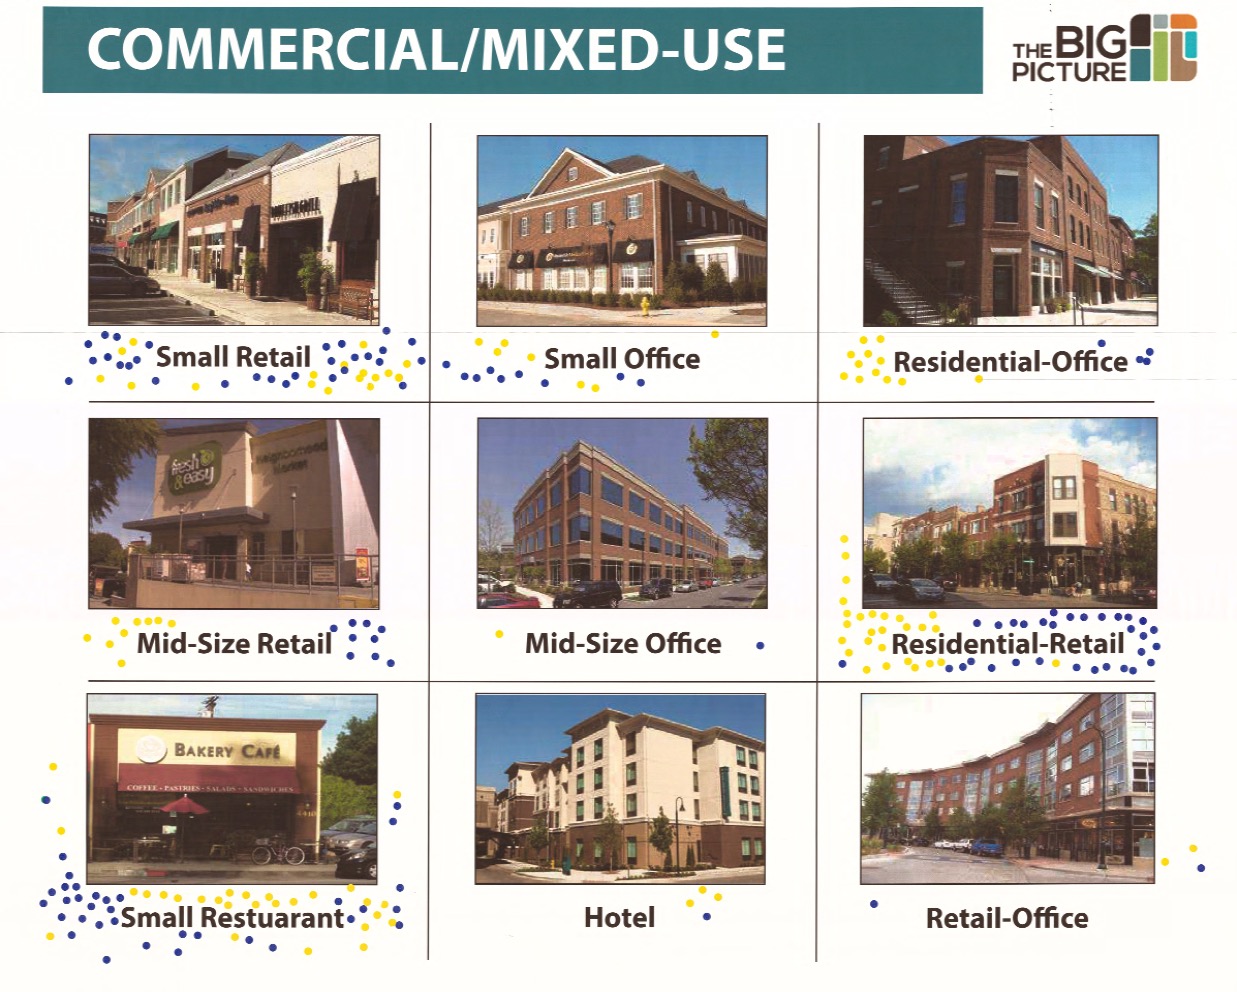 Commercial/Mixed Use Land Type